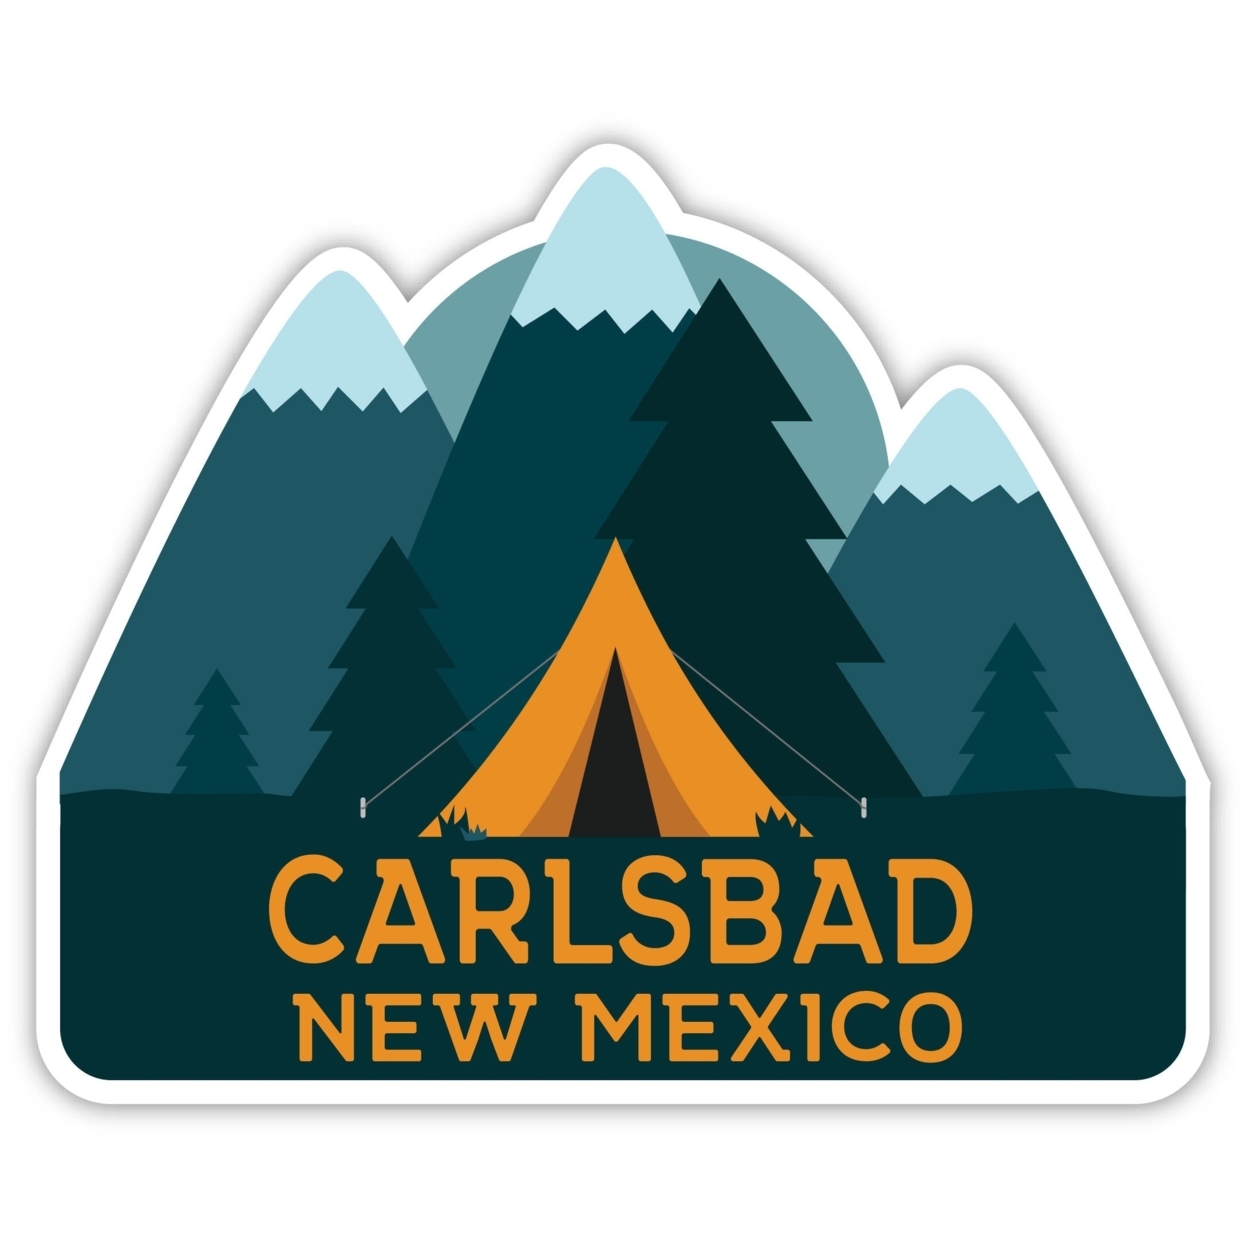 Carlsbad New Mexico Souvenir Decorative Stickers (Choose Theme And Size) - Single Unit, 6-Inch, Tent